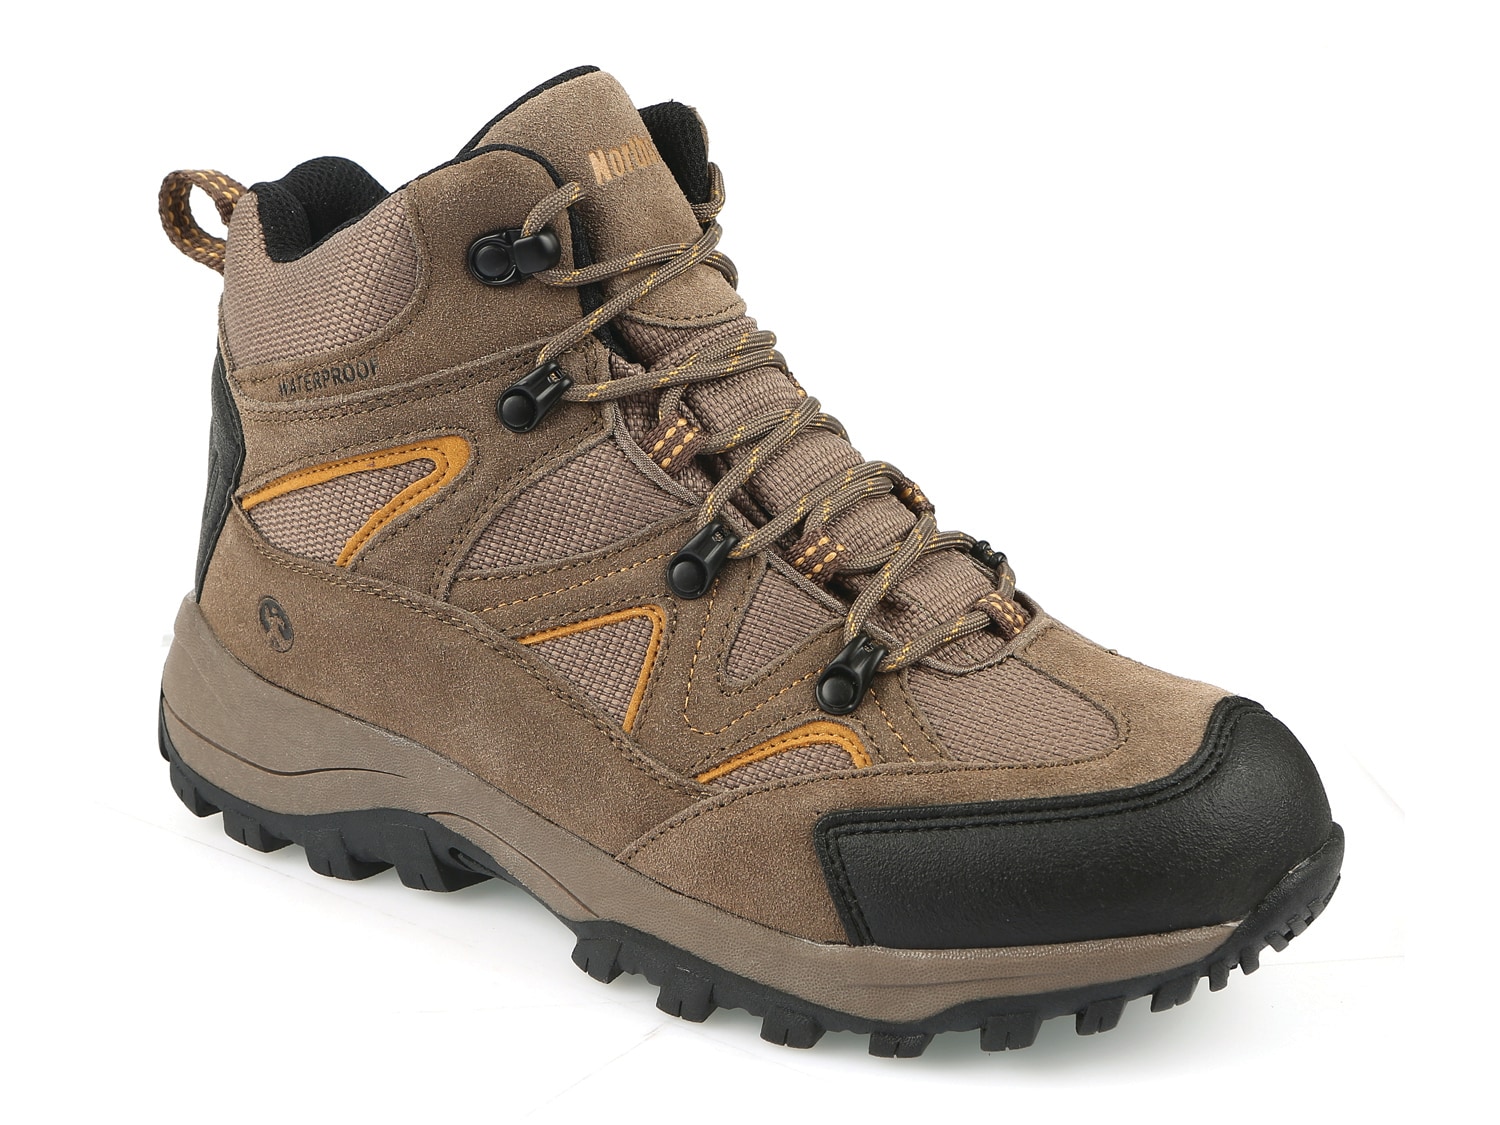 Northside Snohomish Hiking Boot - Men's - Free Shipping | DSW